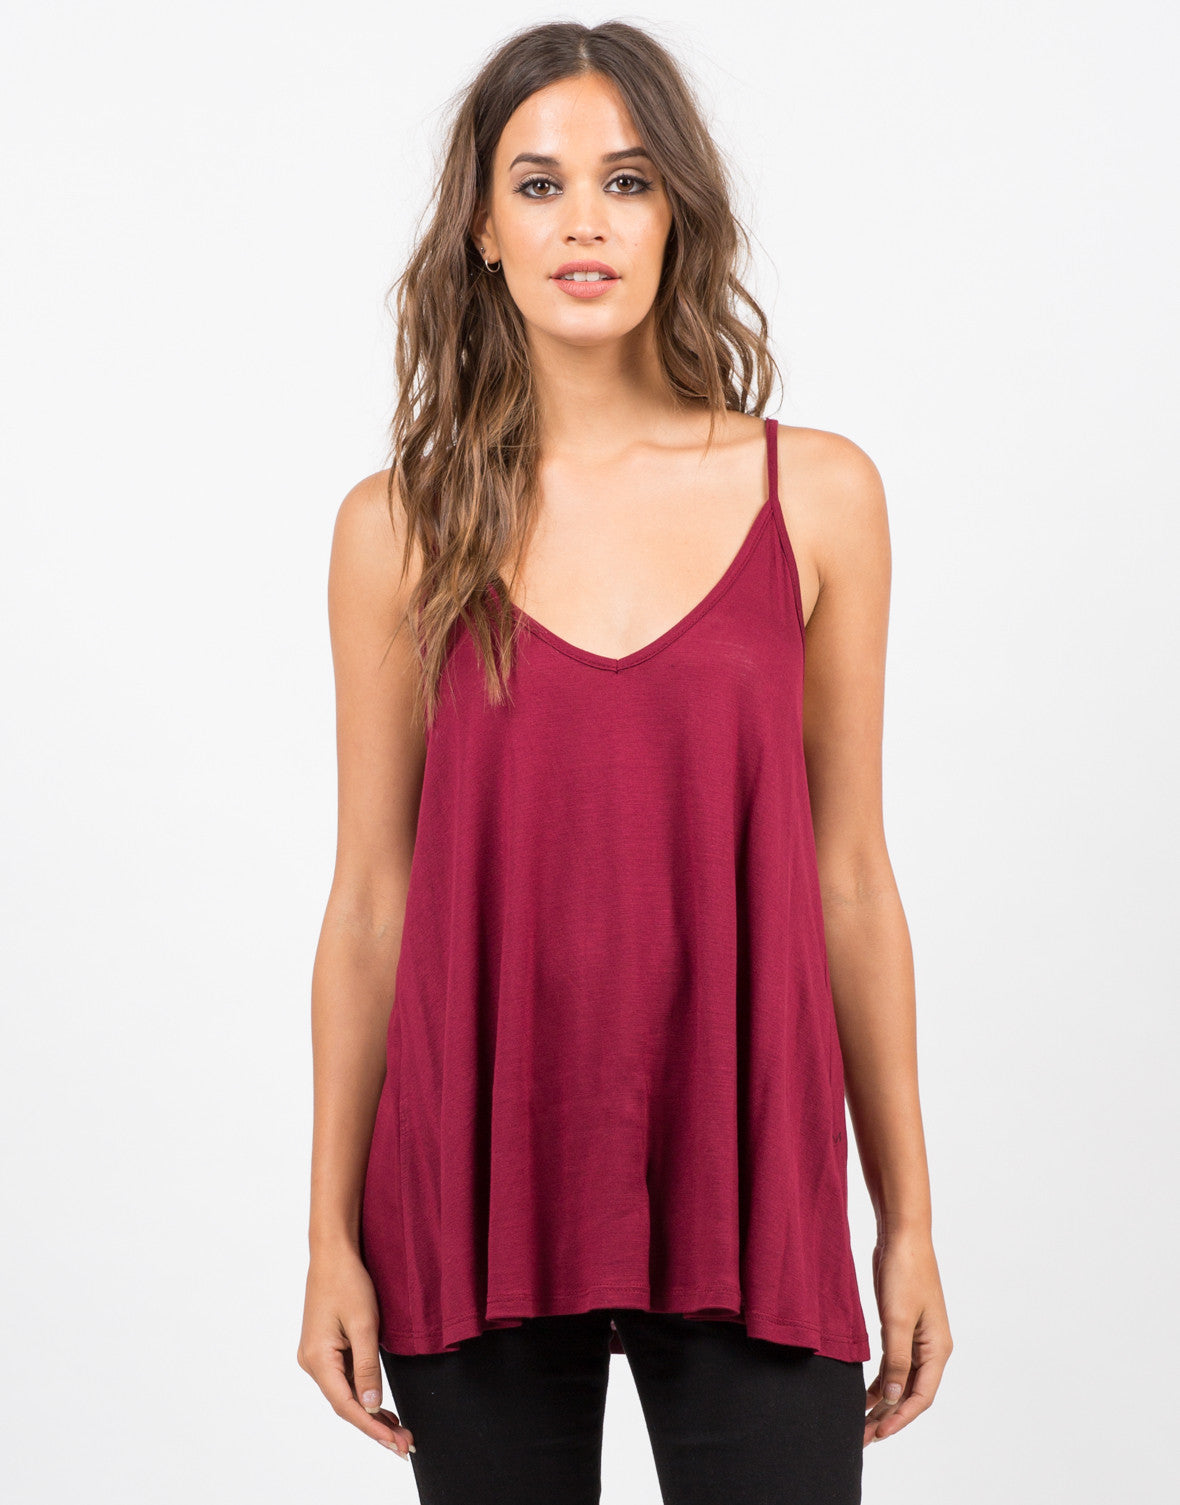 Flare and Flow Tank Top - Red Tank - White Top – Tops – 2020AVE